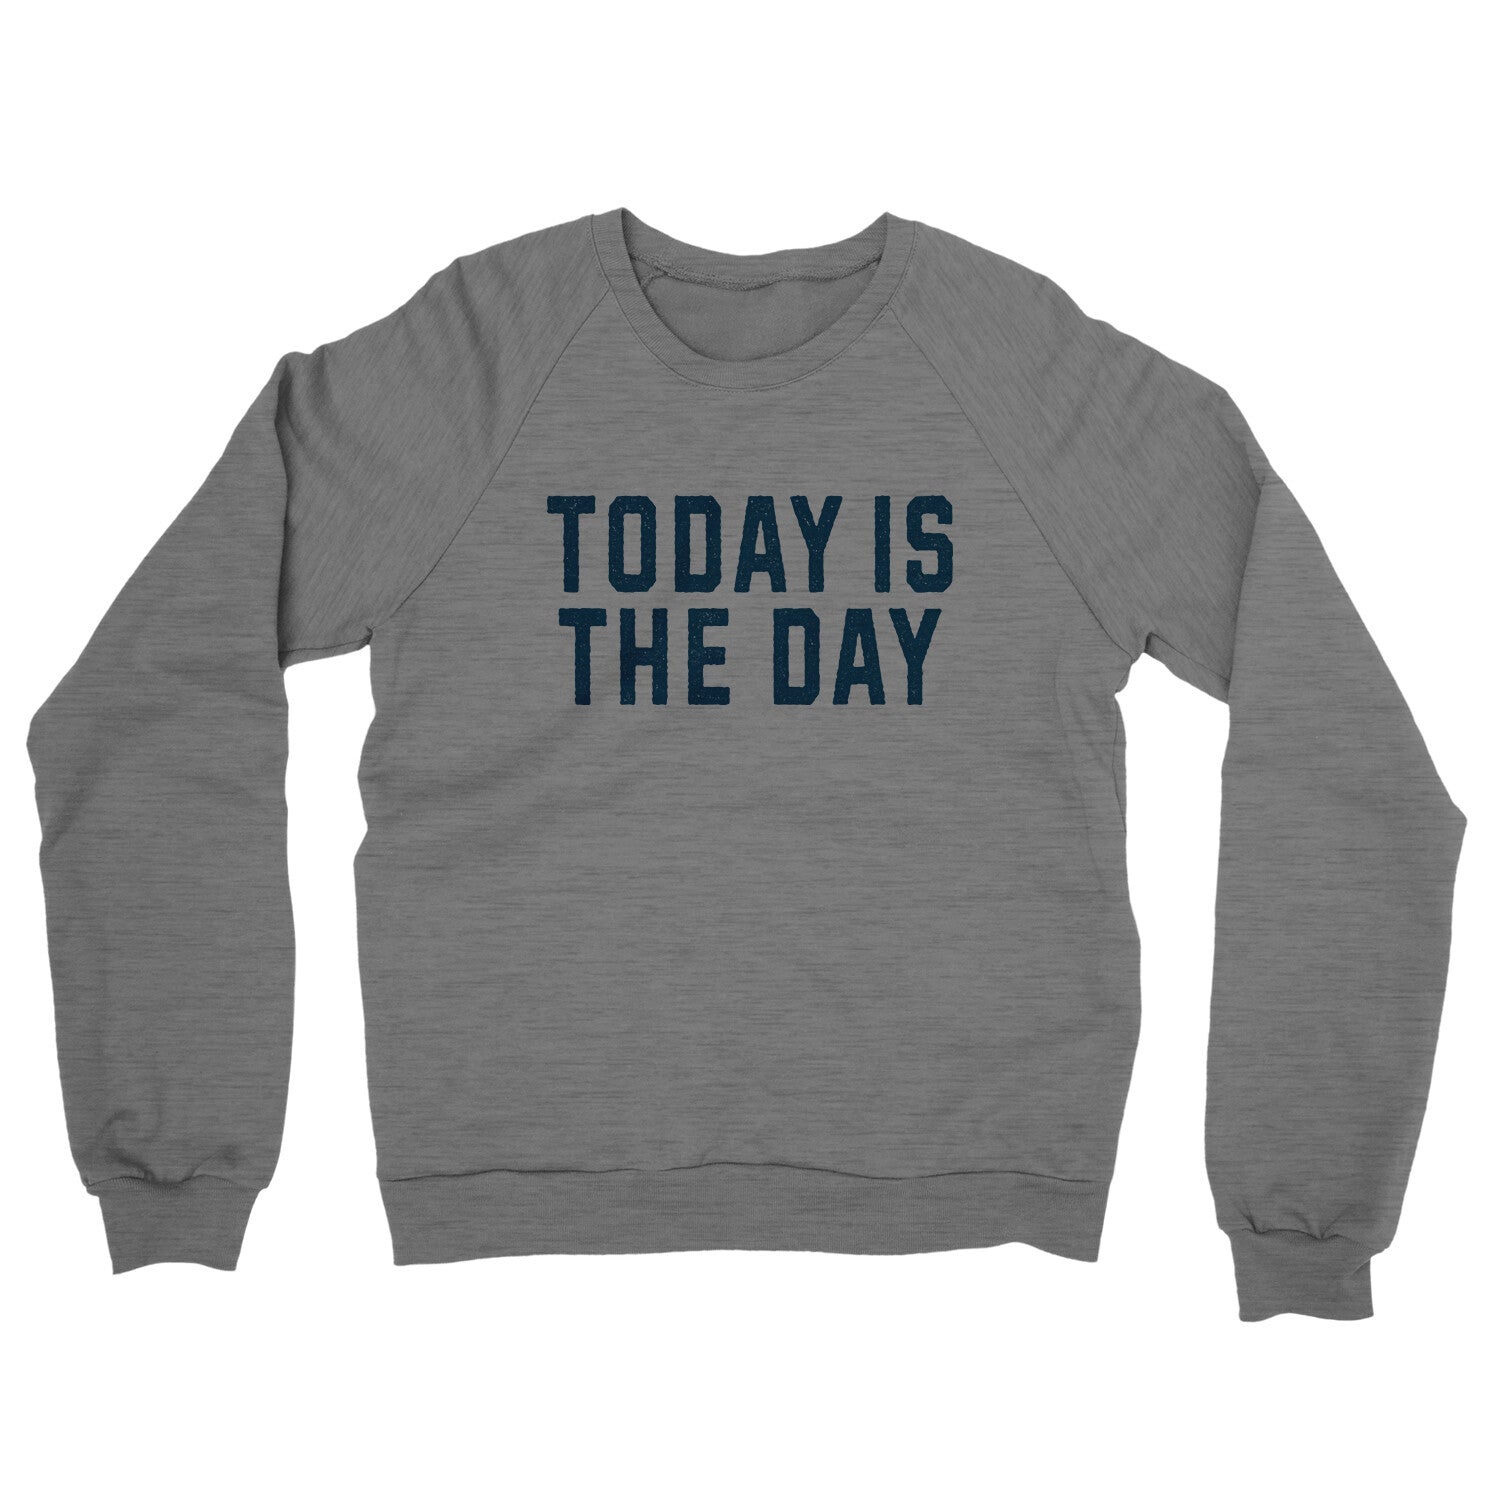 Today is the Day in Graphite Heather Color